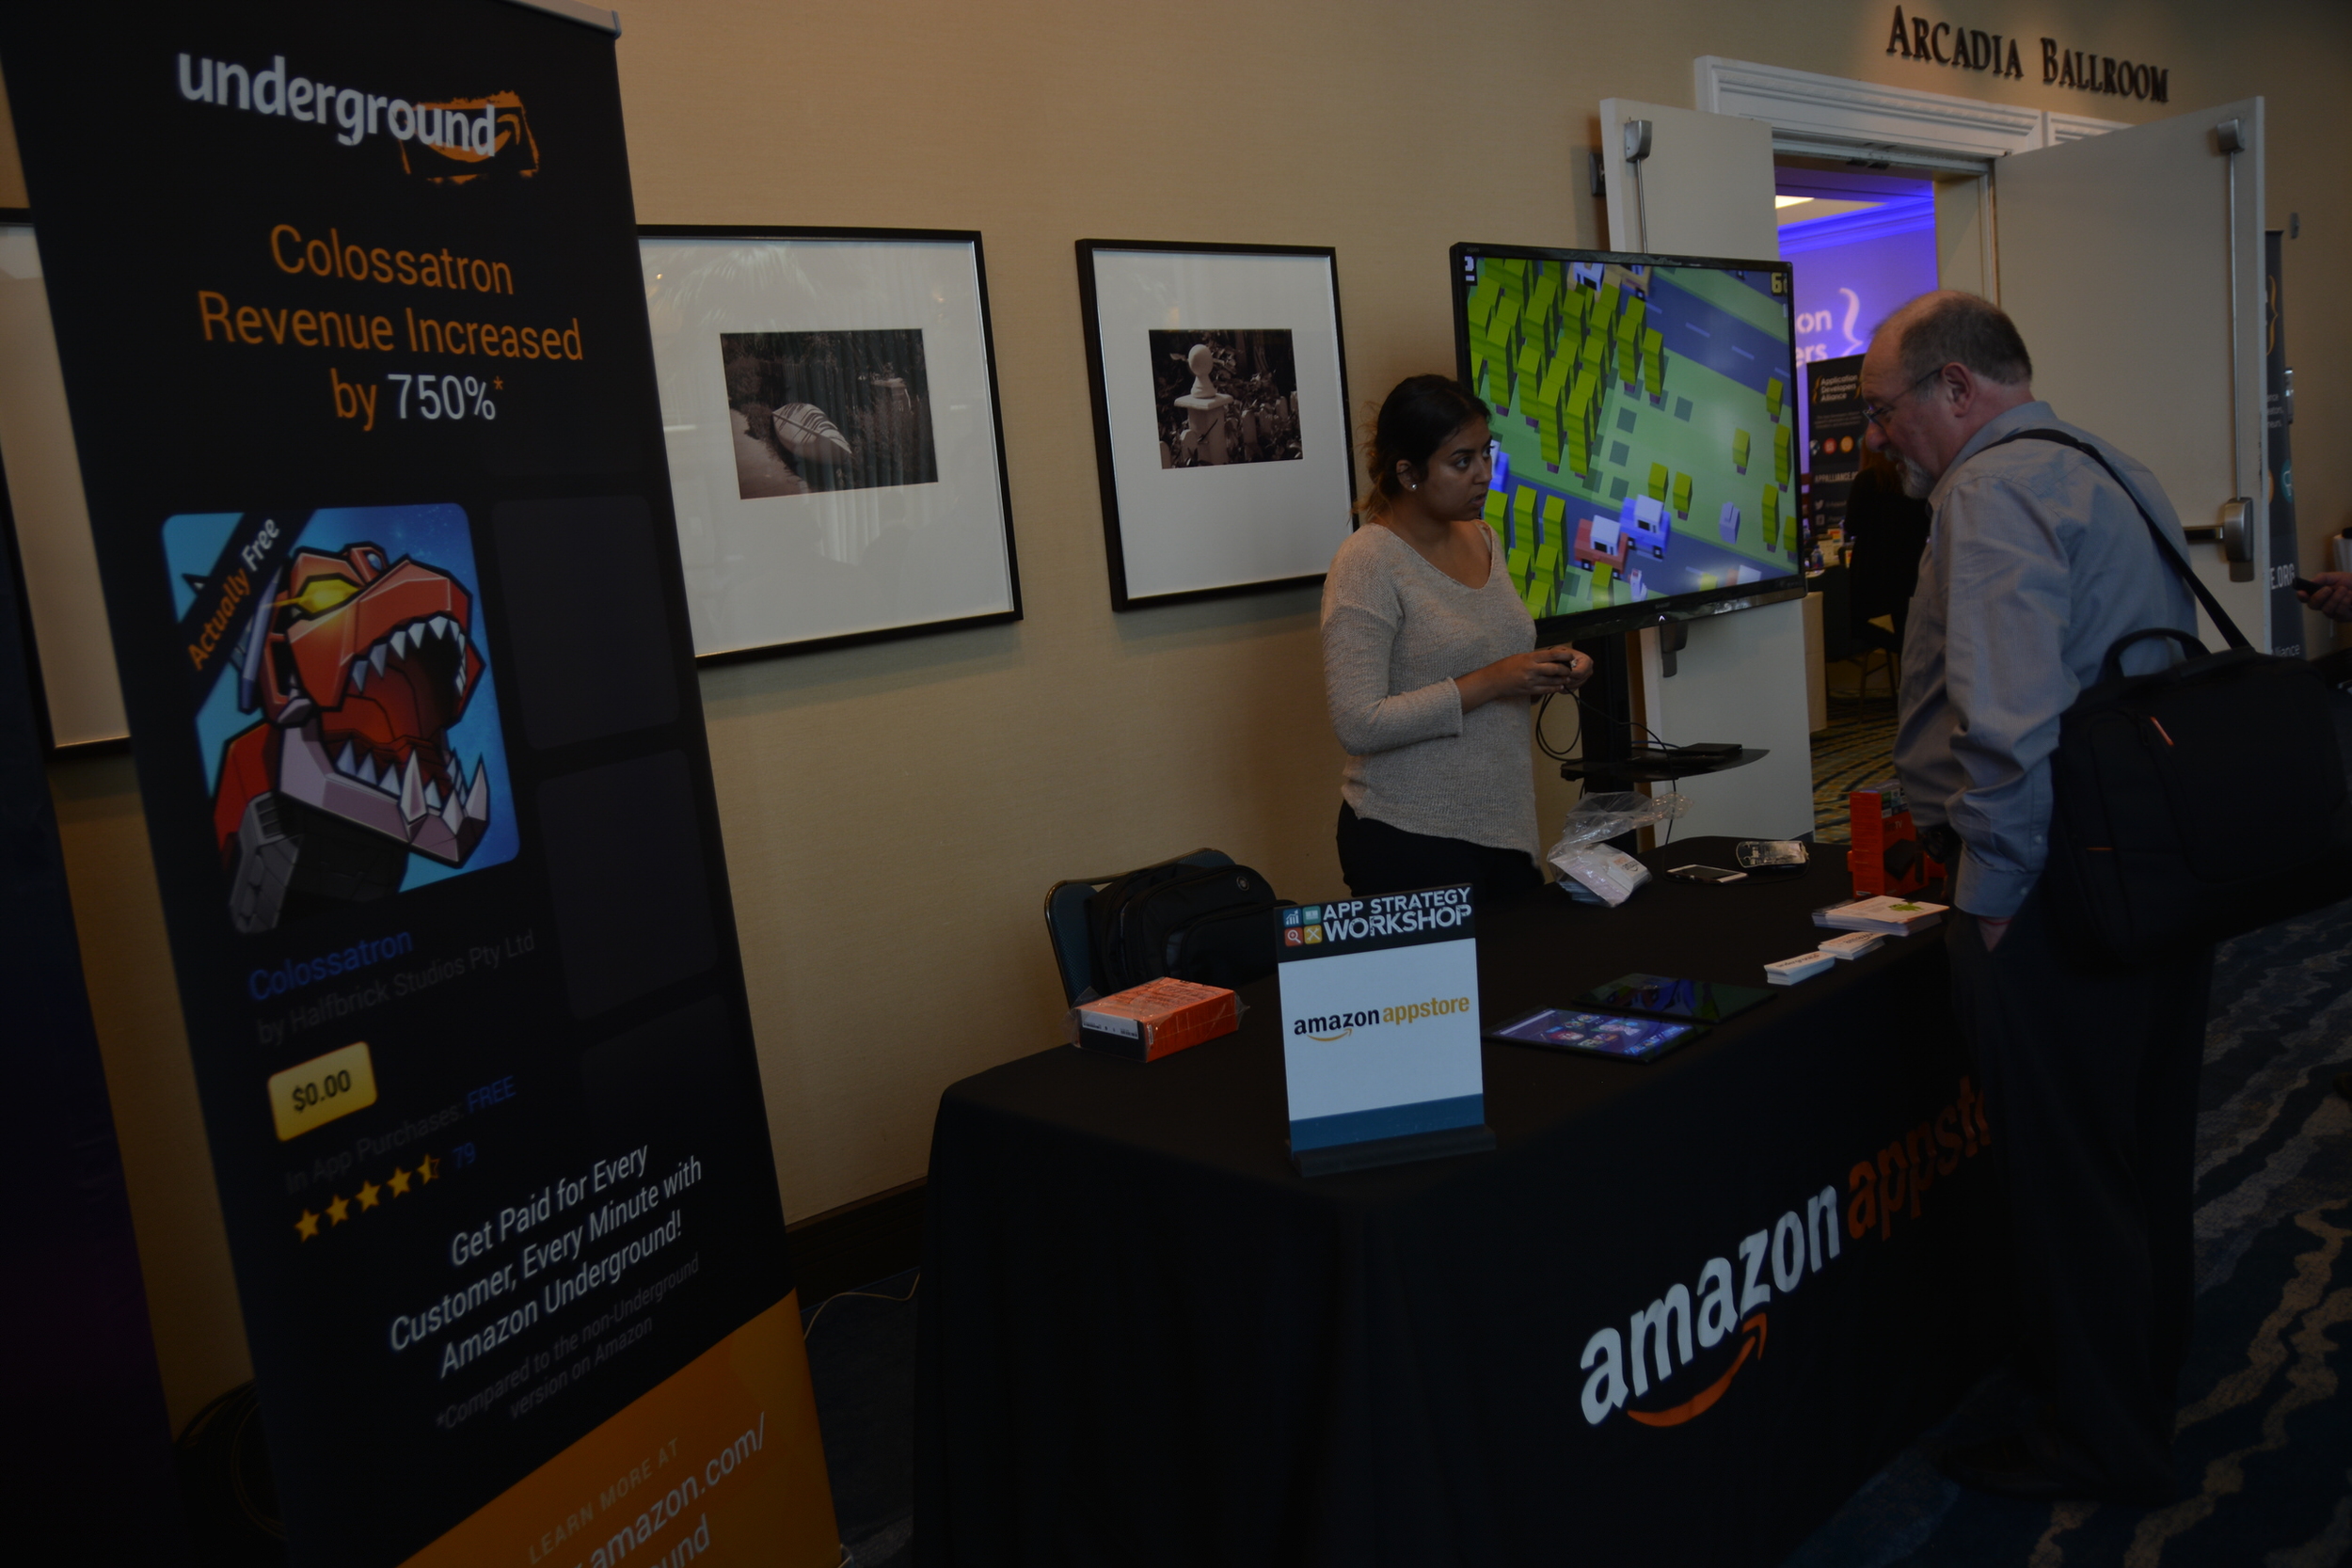 Amazon Appstore hosted a friendly Crossy Road video game competition. The winner took home an Amazon Fire TV!